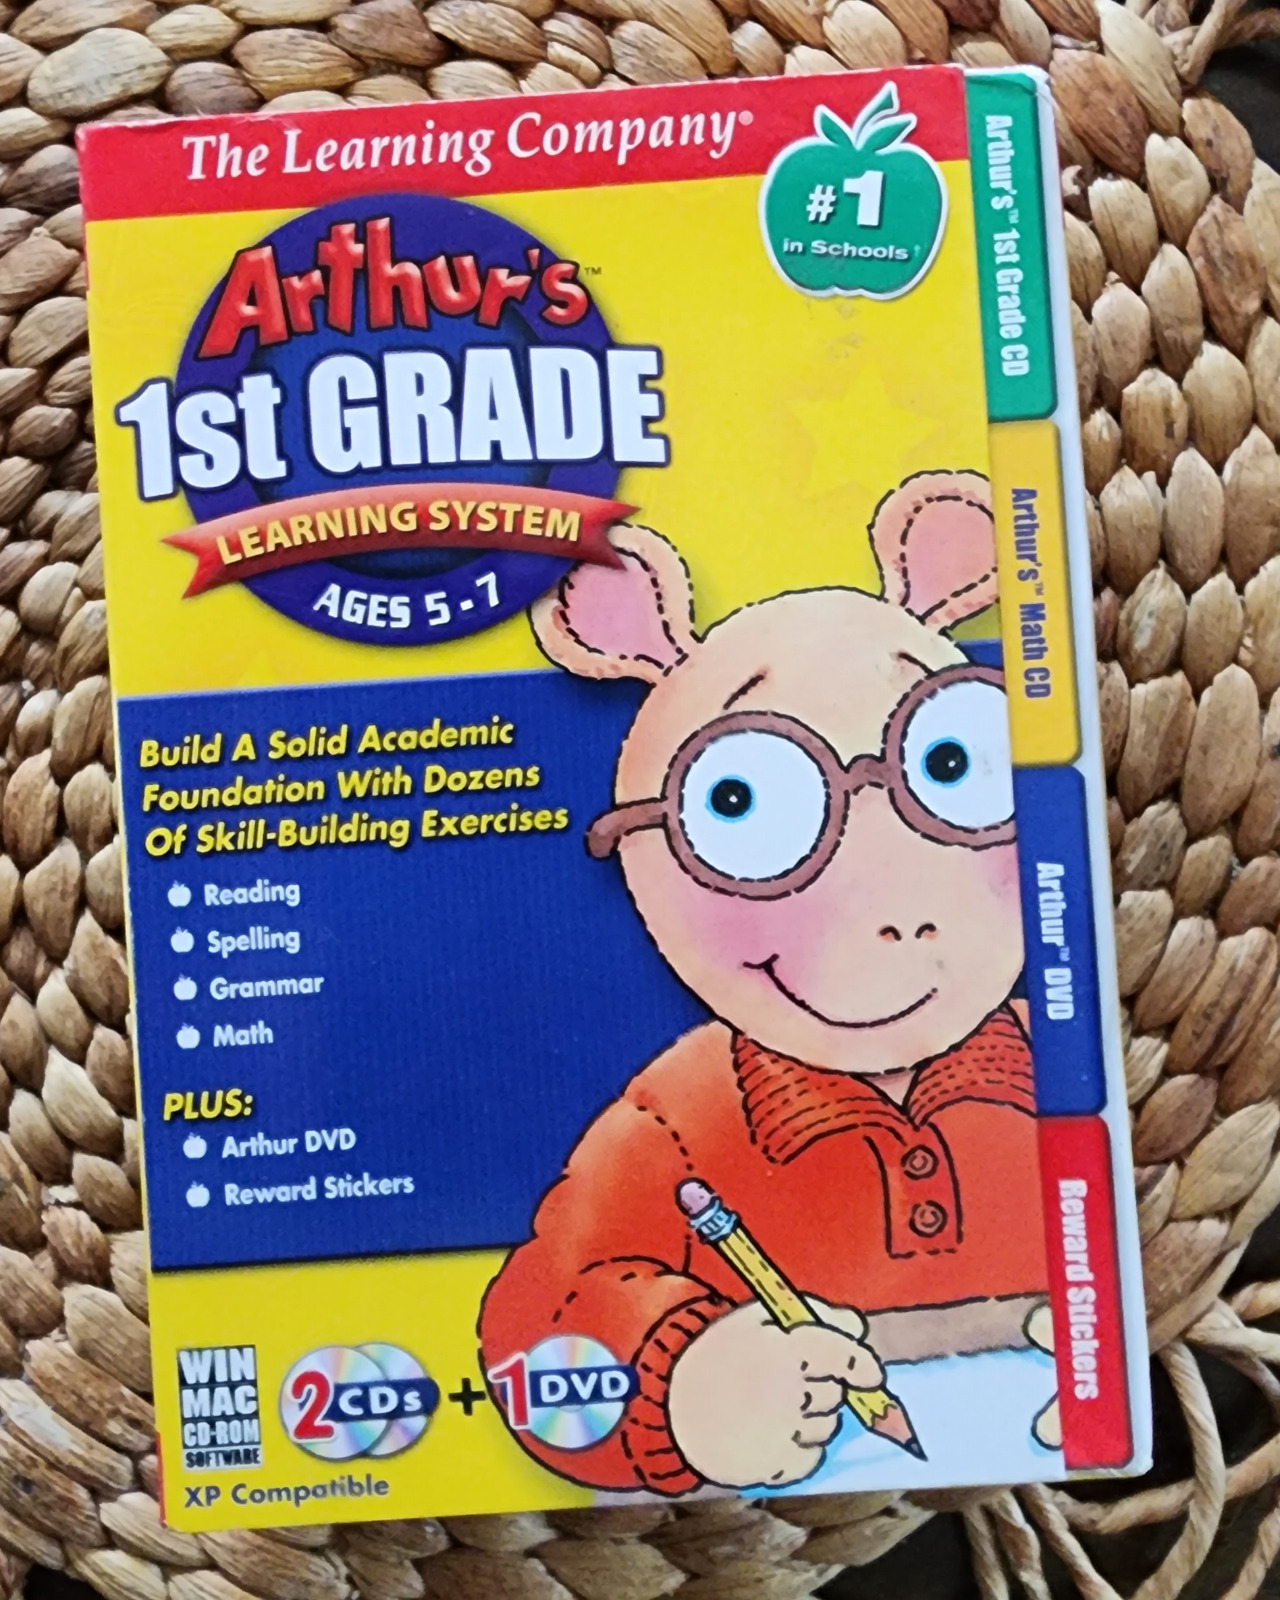 Arthurs 1st Grade Learning System (PC CD/DVD) New US Retail Store Boxed Edition